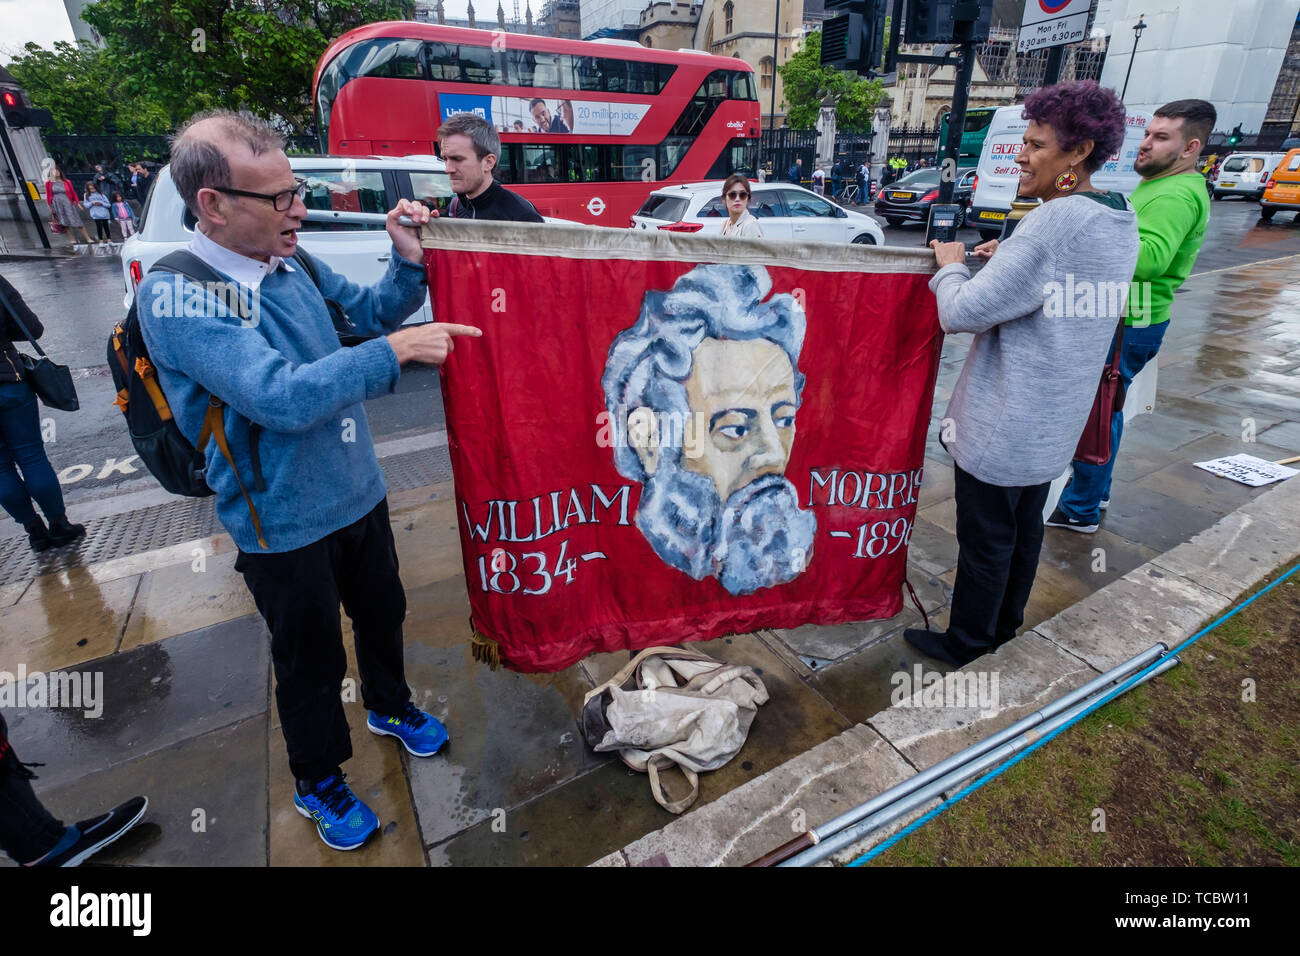 London, UK. 6th June 2019. Just before the second anniversary of the disastrous fire, a small group of activists including Moyra Samuels holds the Hammersith & Fulham TU Council banner at MP Emma Dent Coad asked questions. Promises made by Theresa May and Kensington & Chelsea council to the survivors have not been kept and no arrests have been made over the corruption, criminal negligence and disregard for safety that led to 72 deaths. They call for Government action to rehouse survivors, clear toxic waste, make all similar blocks safe and ensure justice. Peter Marshall/Alamy Live News Stock Photo